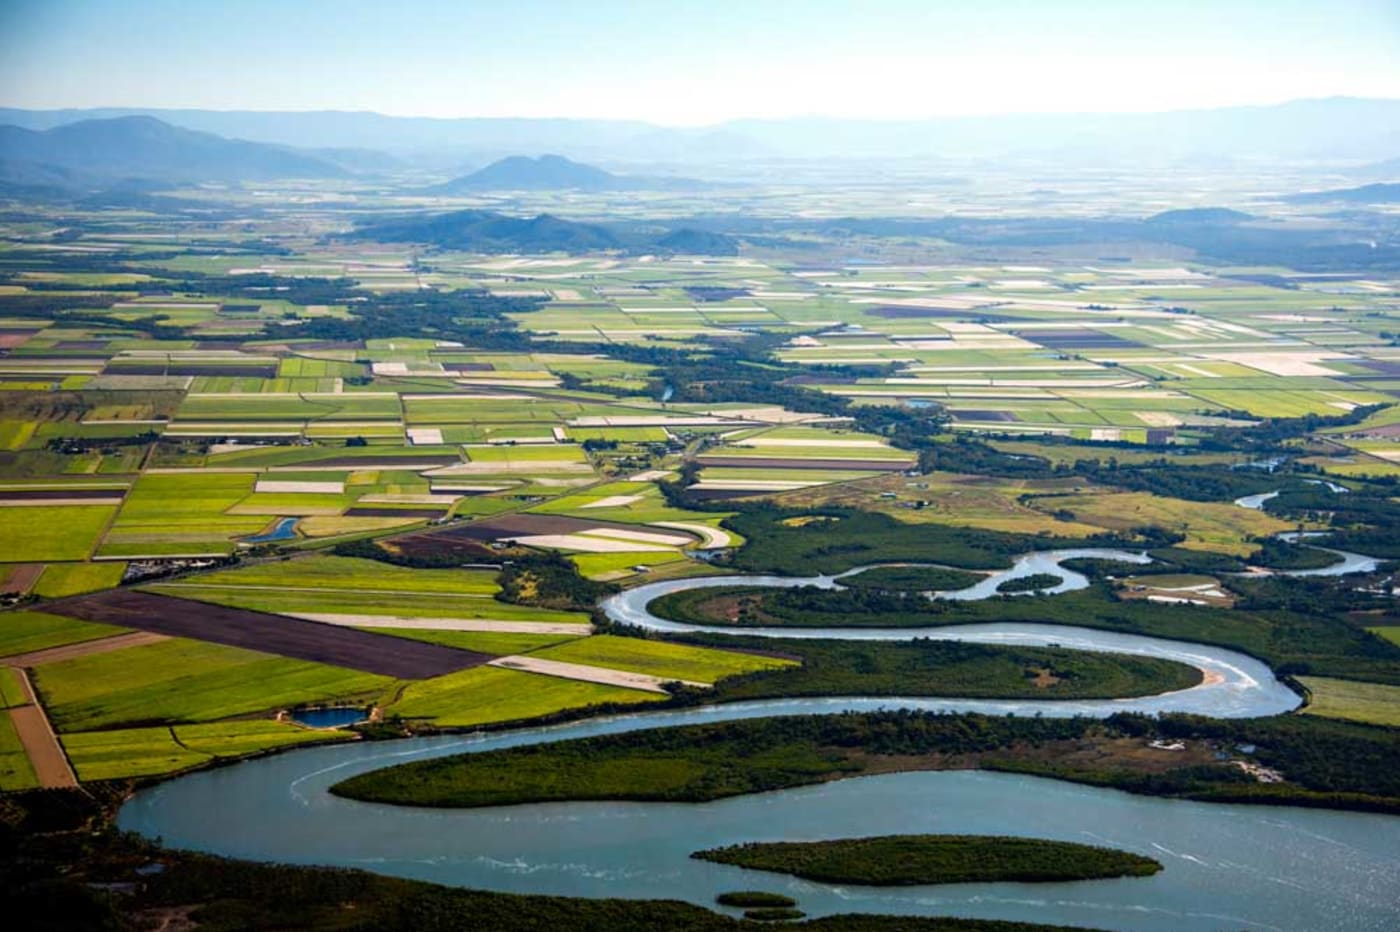 Aerial view of the sugar cane fields in the Mackay region, Queensland, June 2013